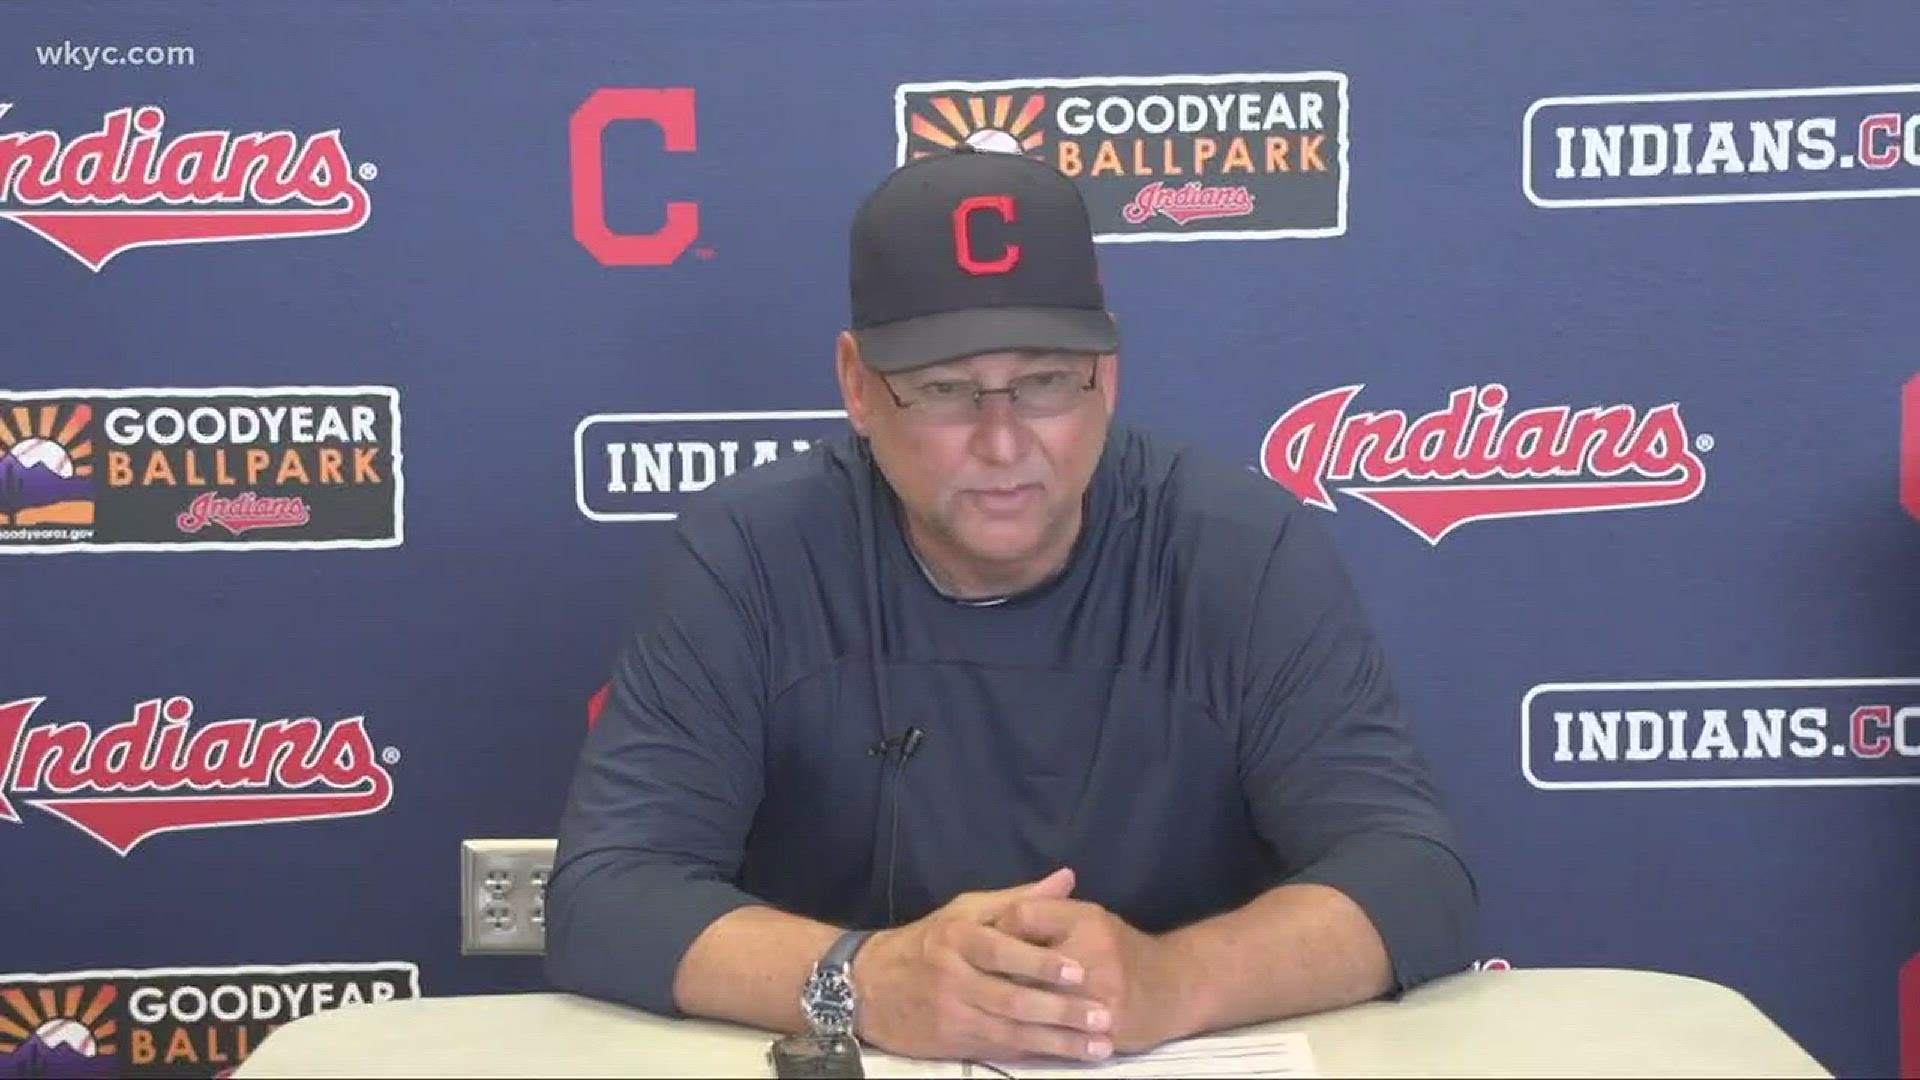 Indians manager Terry Francona sends well-wishes to Cavs coach Ty Lue